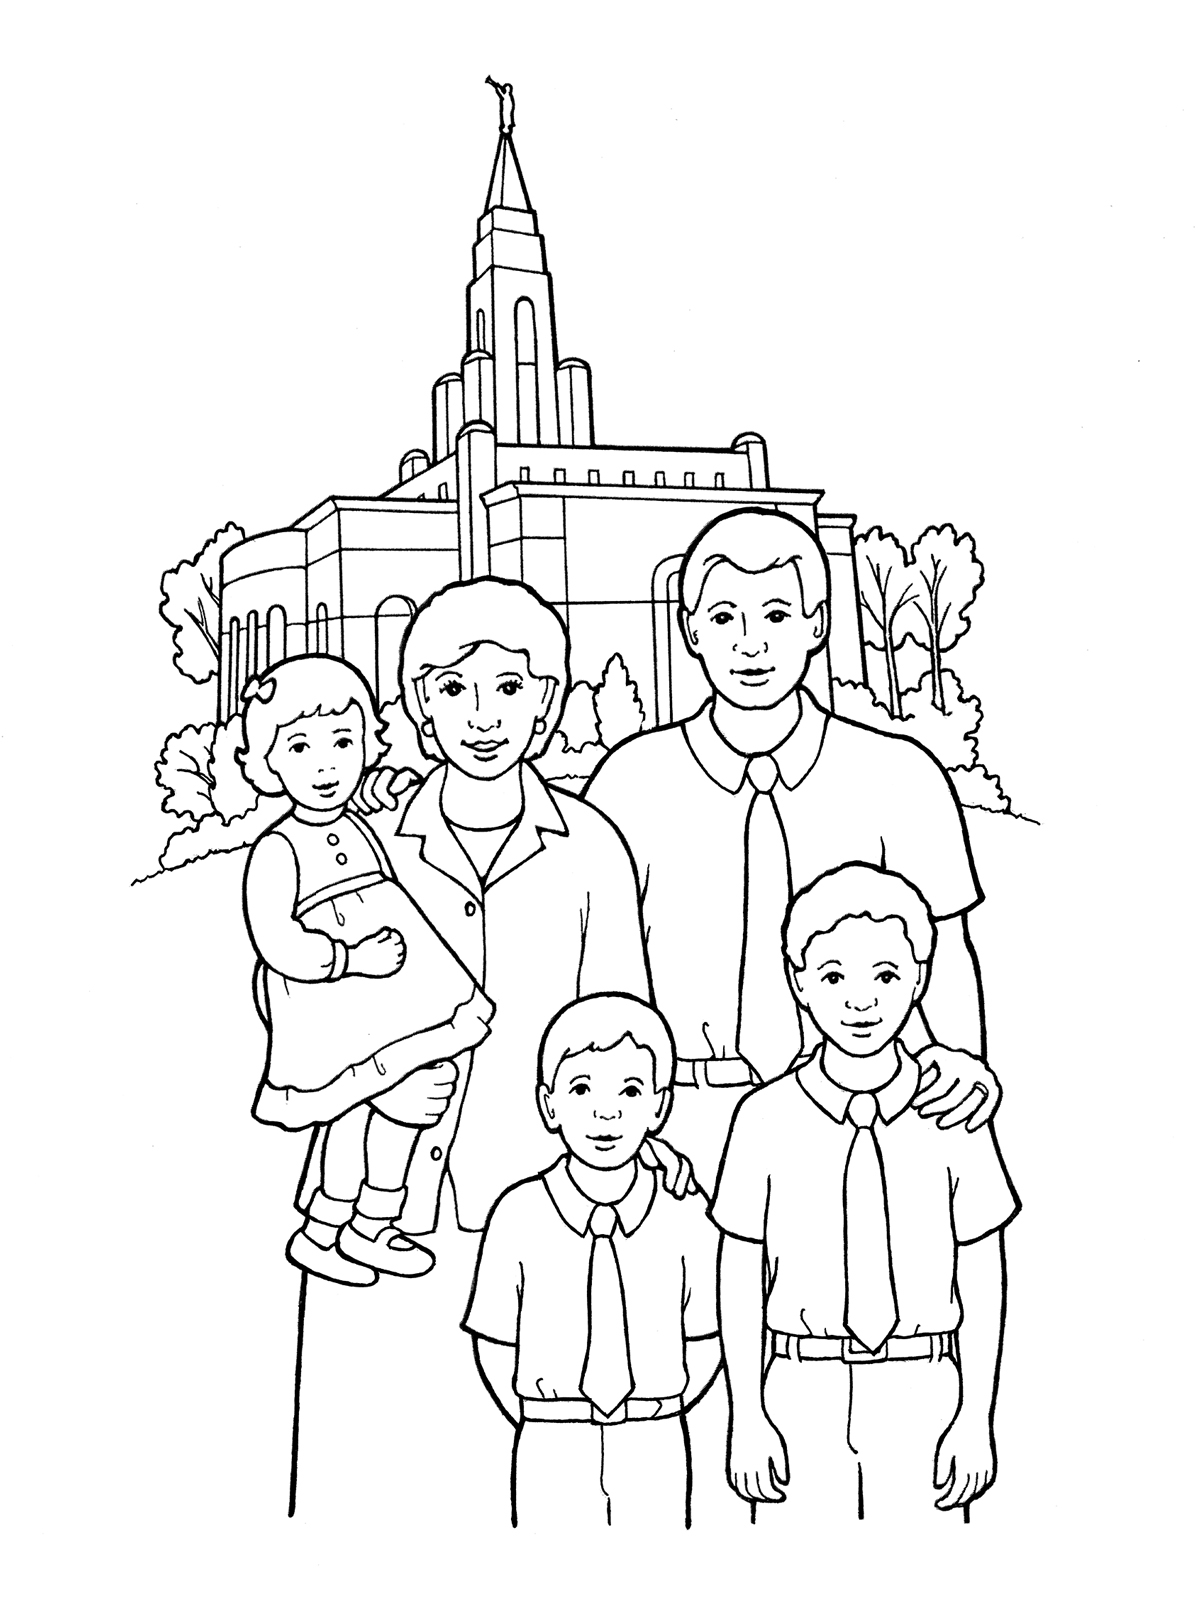  Coloring Pages Of Families For Kids 6